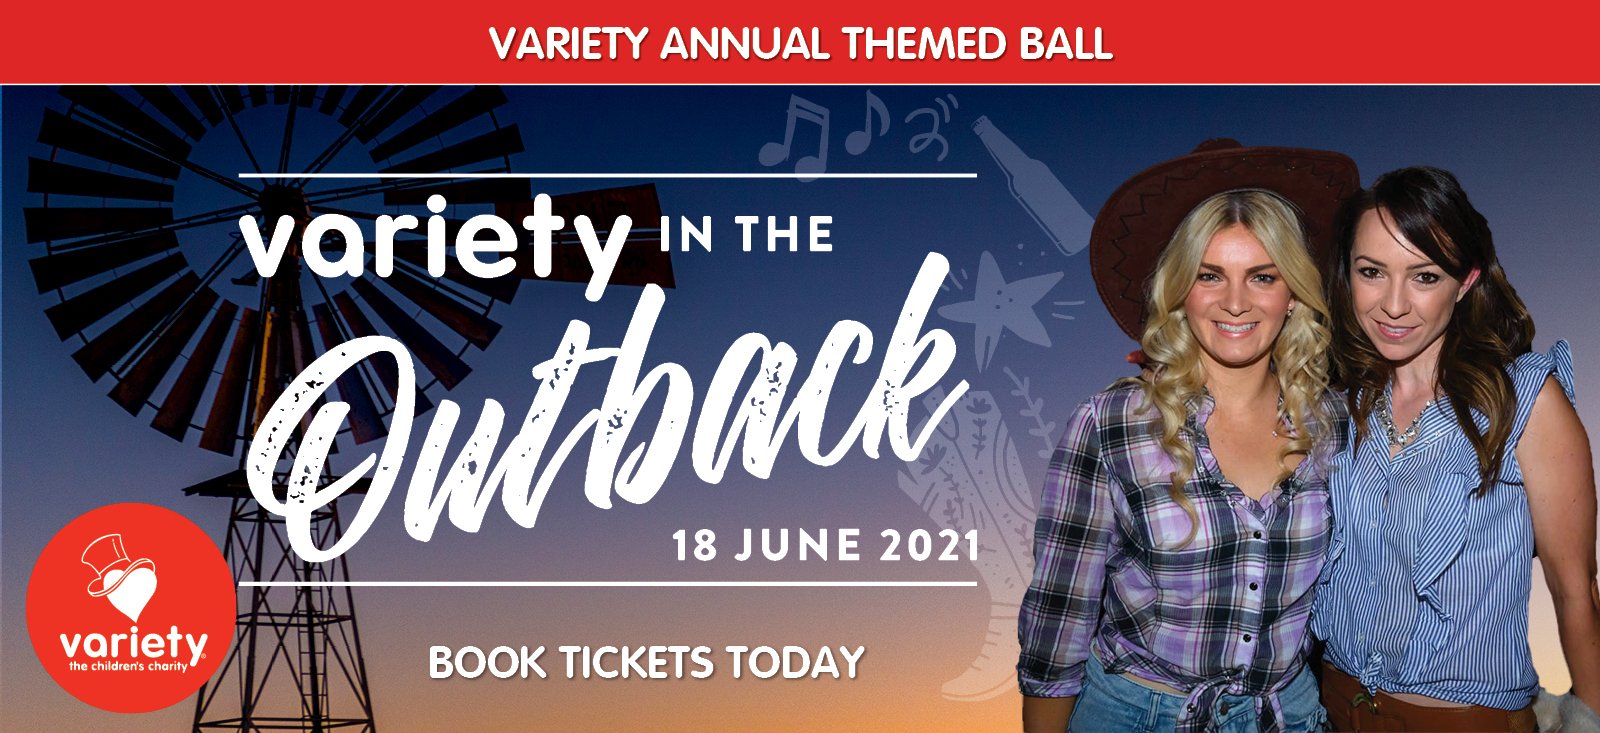 Tickets ON SALE for the Variety Annual Themed Ball: Variety in the Outback